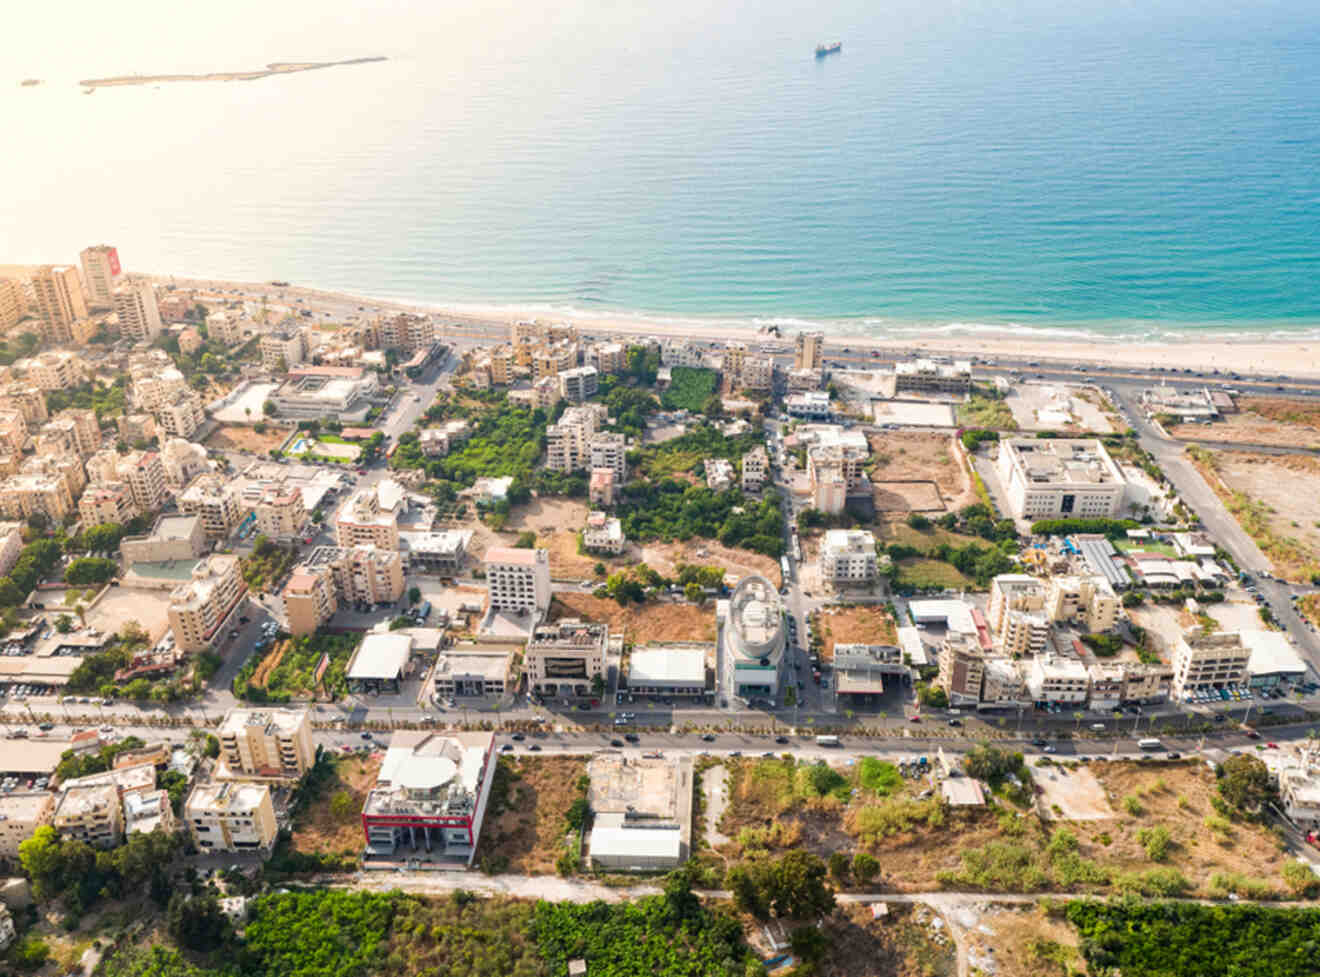 Aerial view of Sidon